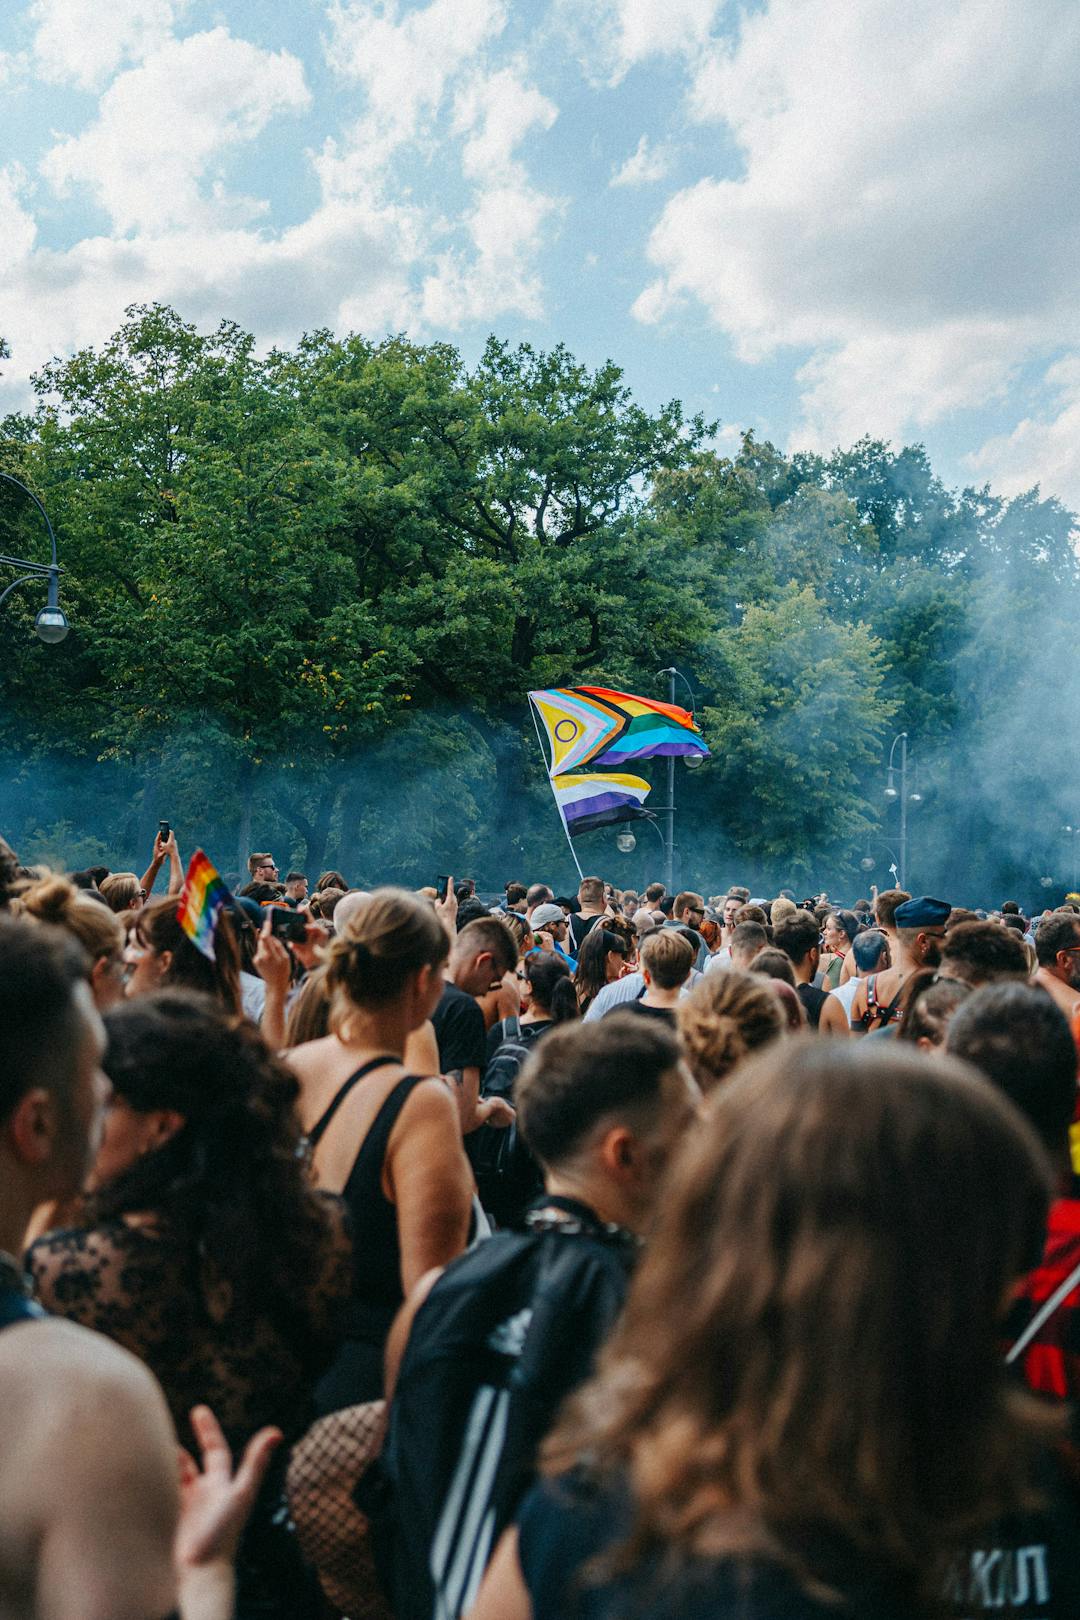 Picture of a Demonstration. The Pride Flag, Trans Flag, and the Flag of german Party 'Die Linke' is visible.